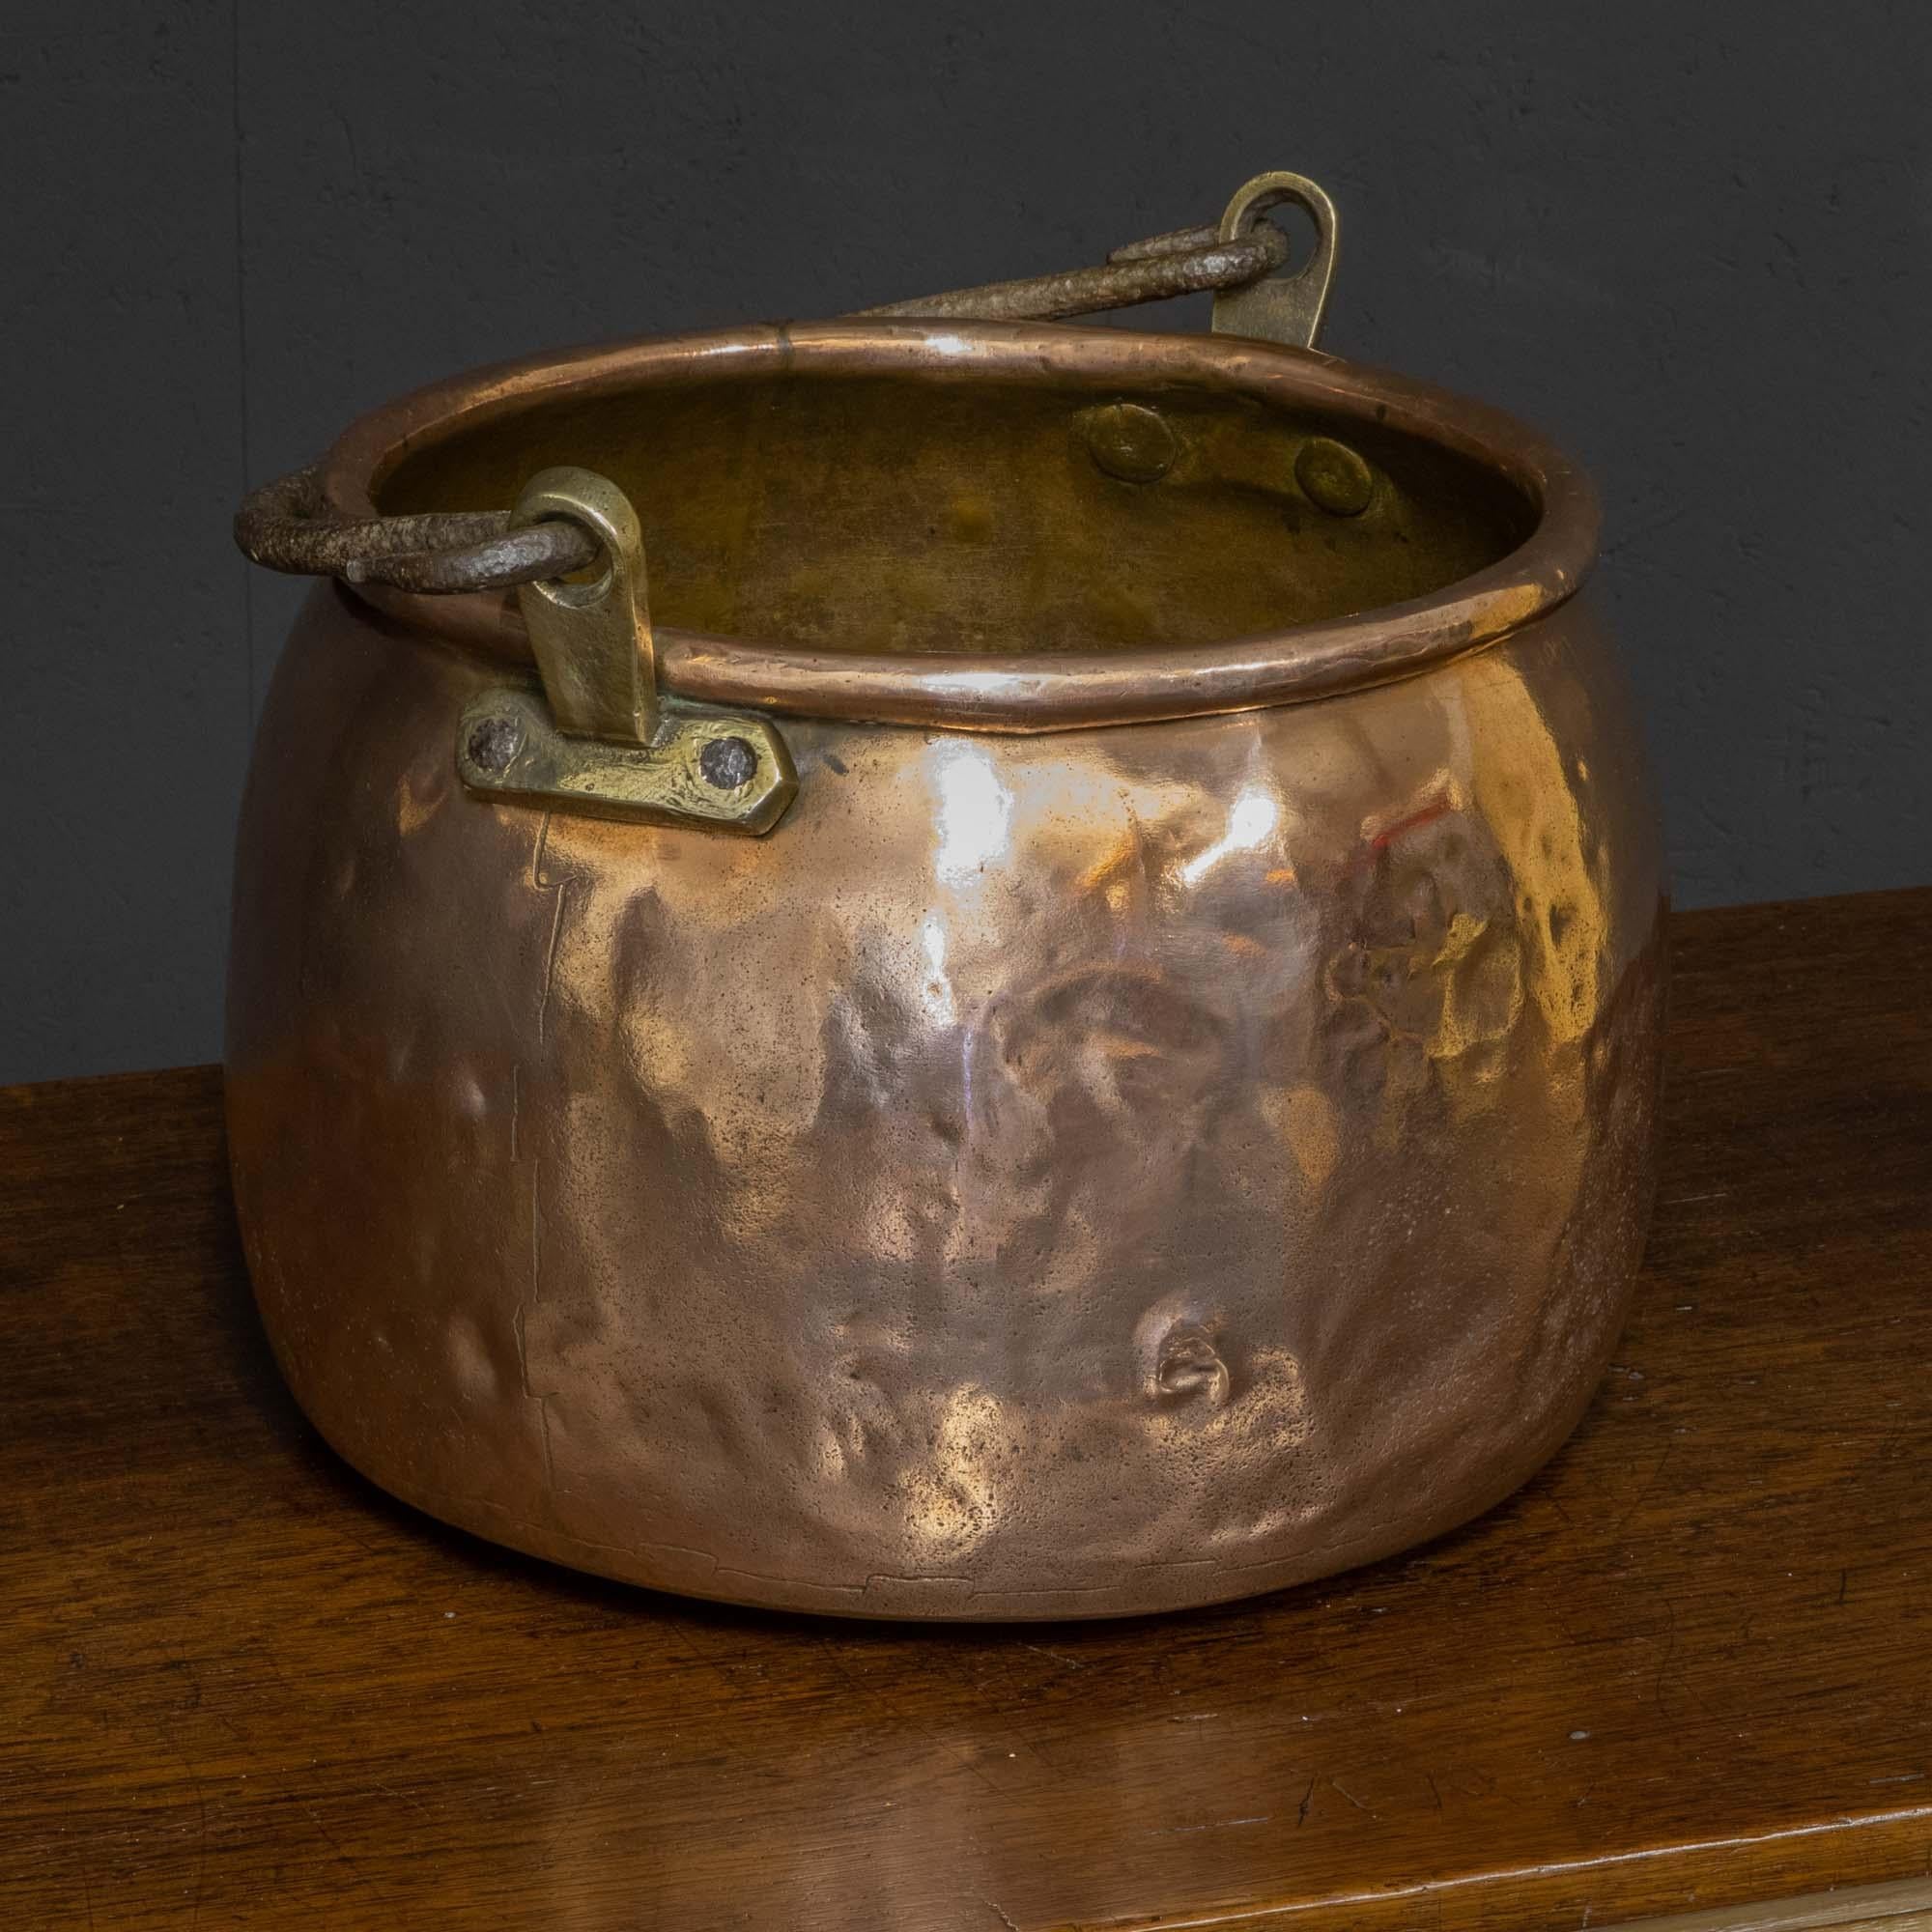 A wonderful early 19th century copper cooking vessel of very heavy duty manufacture. The round body has a large wired edge to the top on the underside of which are a pair of thick brass mounts which give great support for the wrought iron handle.